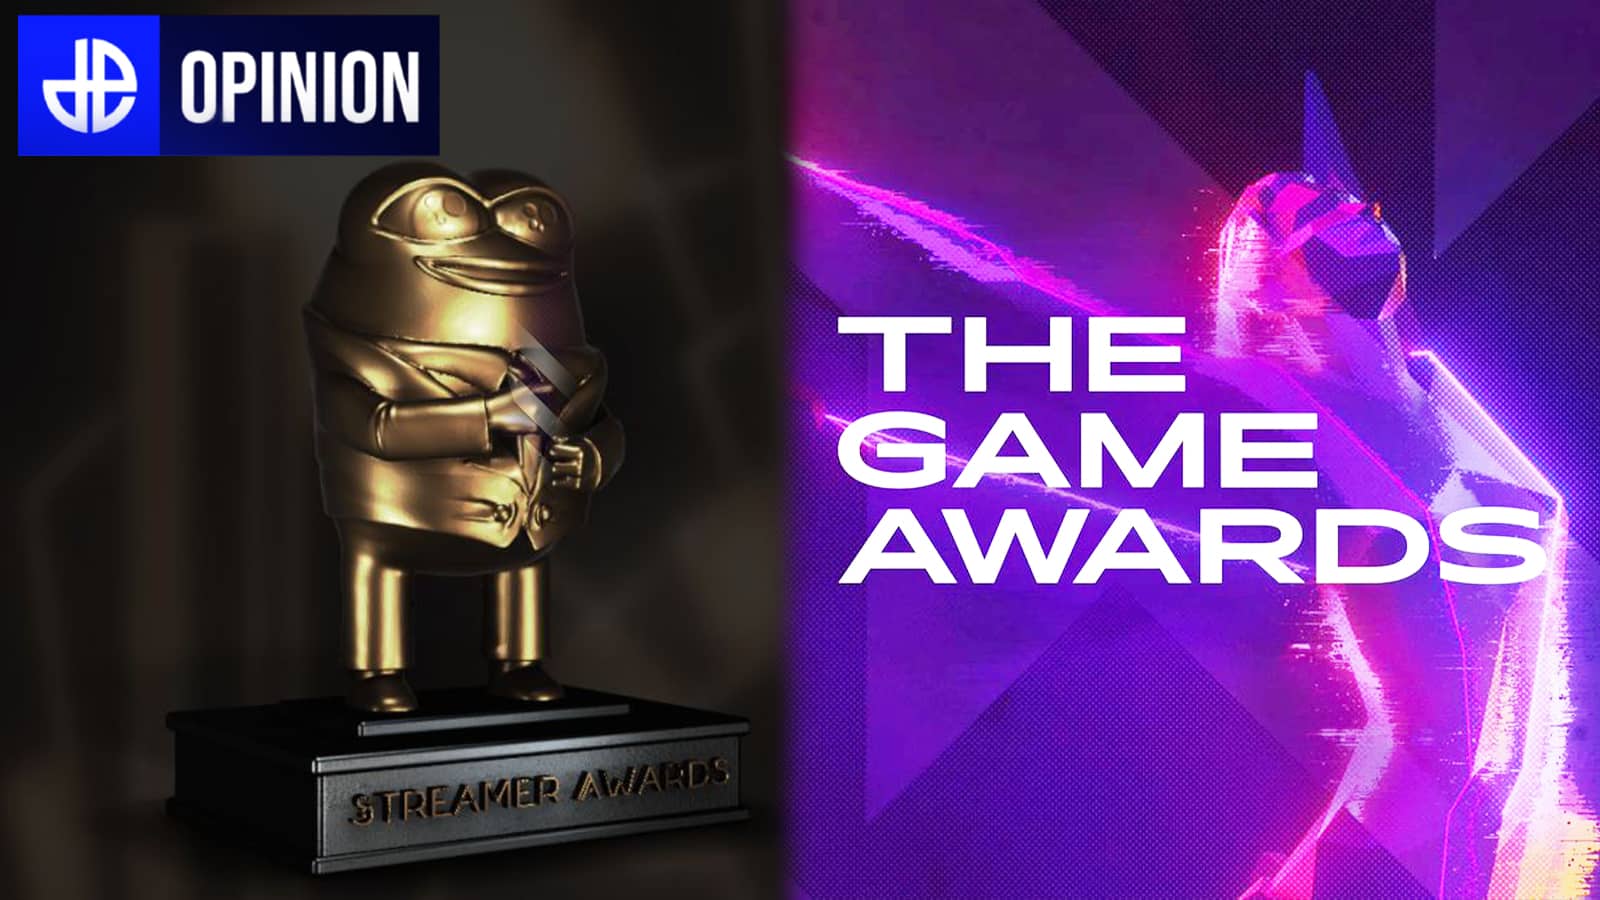 Check out The Game Awards 2020, nominations, live stream, award